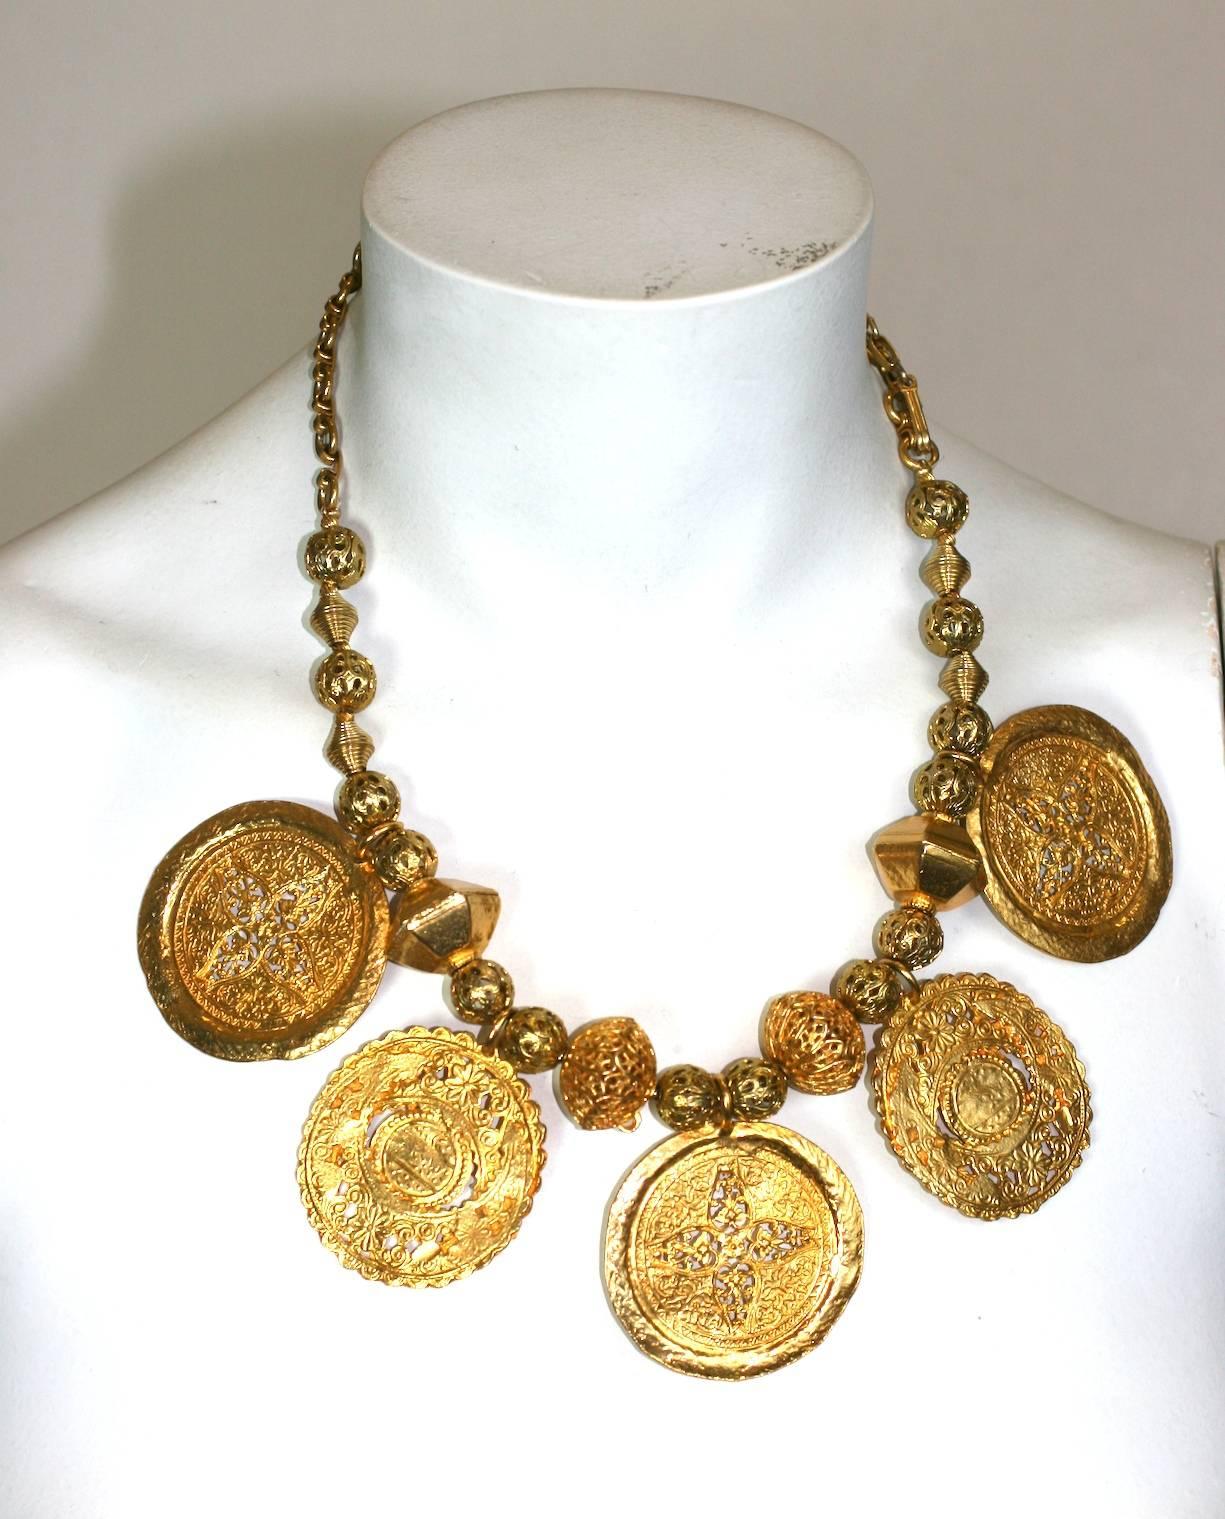 Kenneth Jay Lane Ancient Medallion Necklace In Excellent Condition For Sale In New York, NY